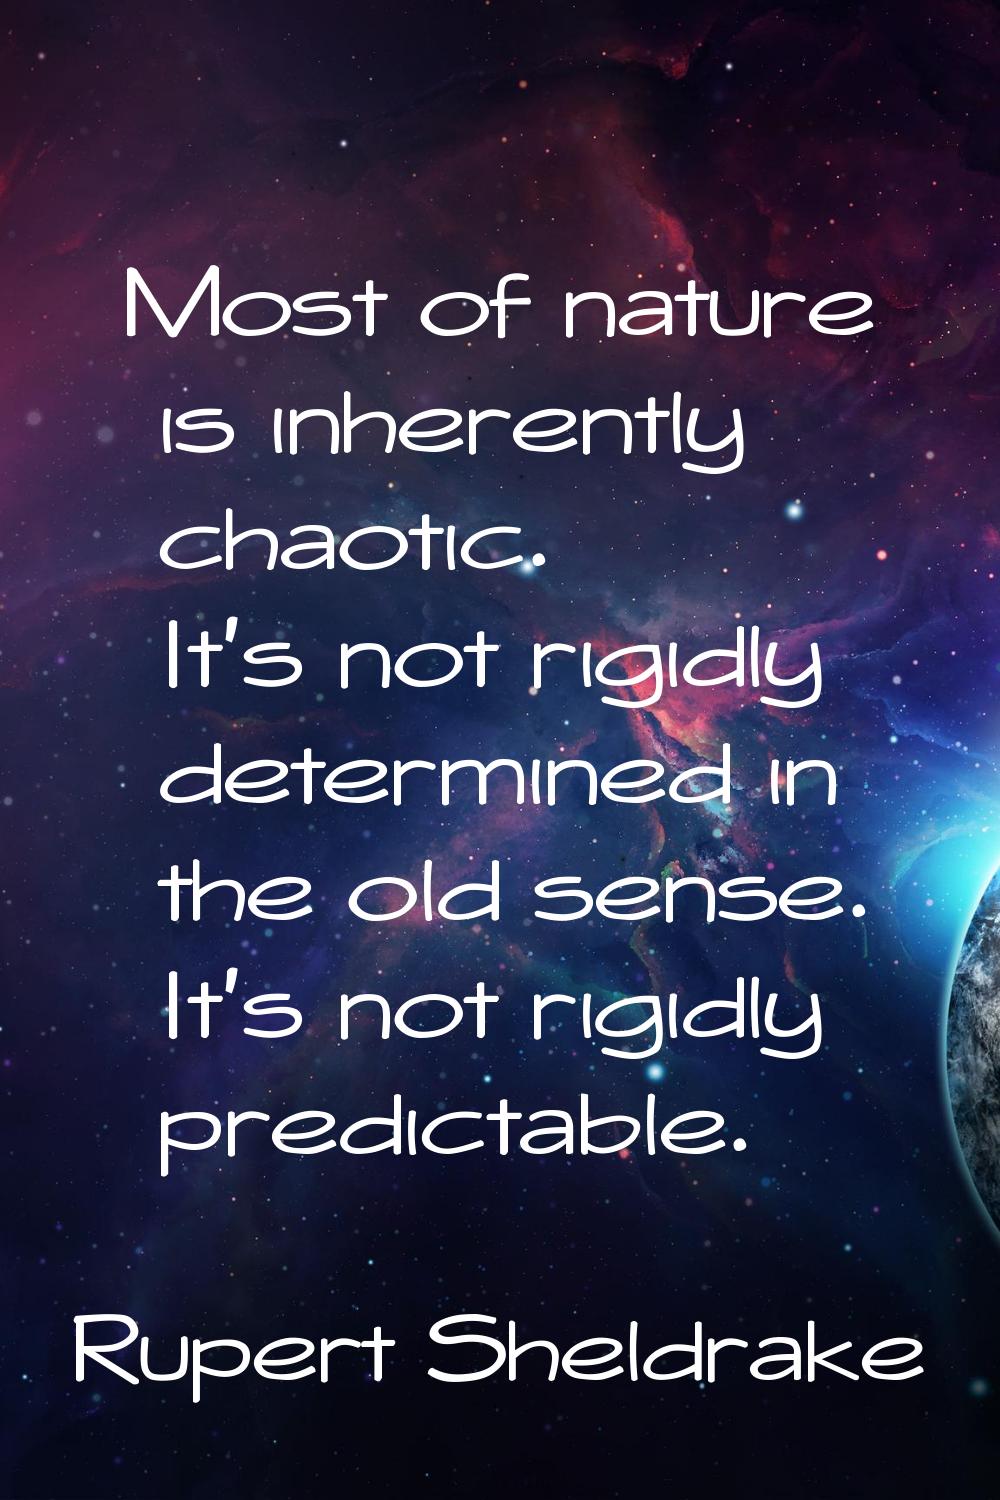 Most of nature is inherently chaotic. It's not rigidly determined in the old sense. It's not rigidl